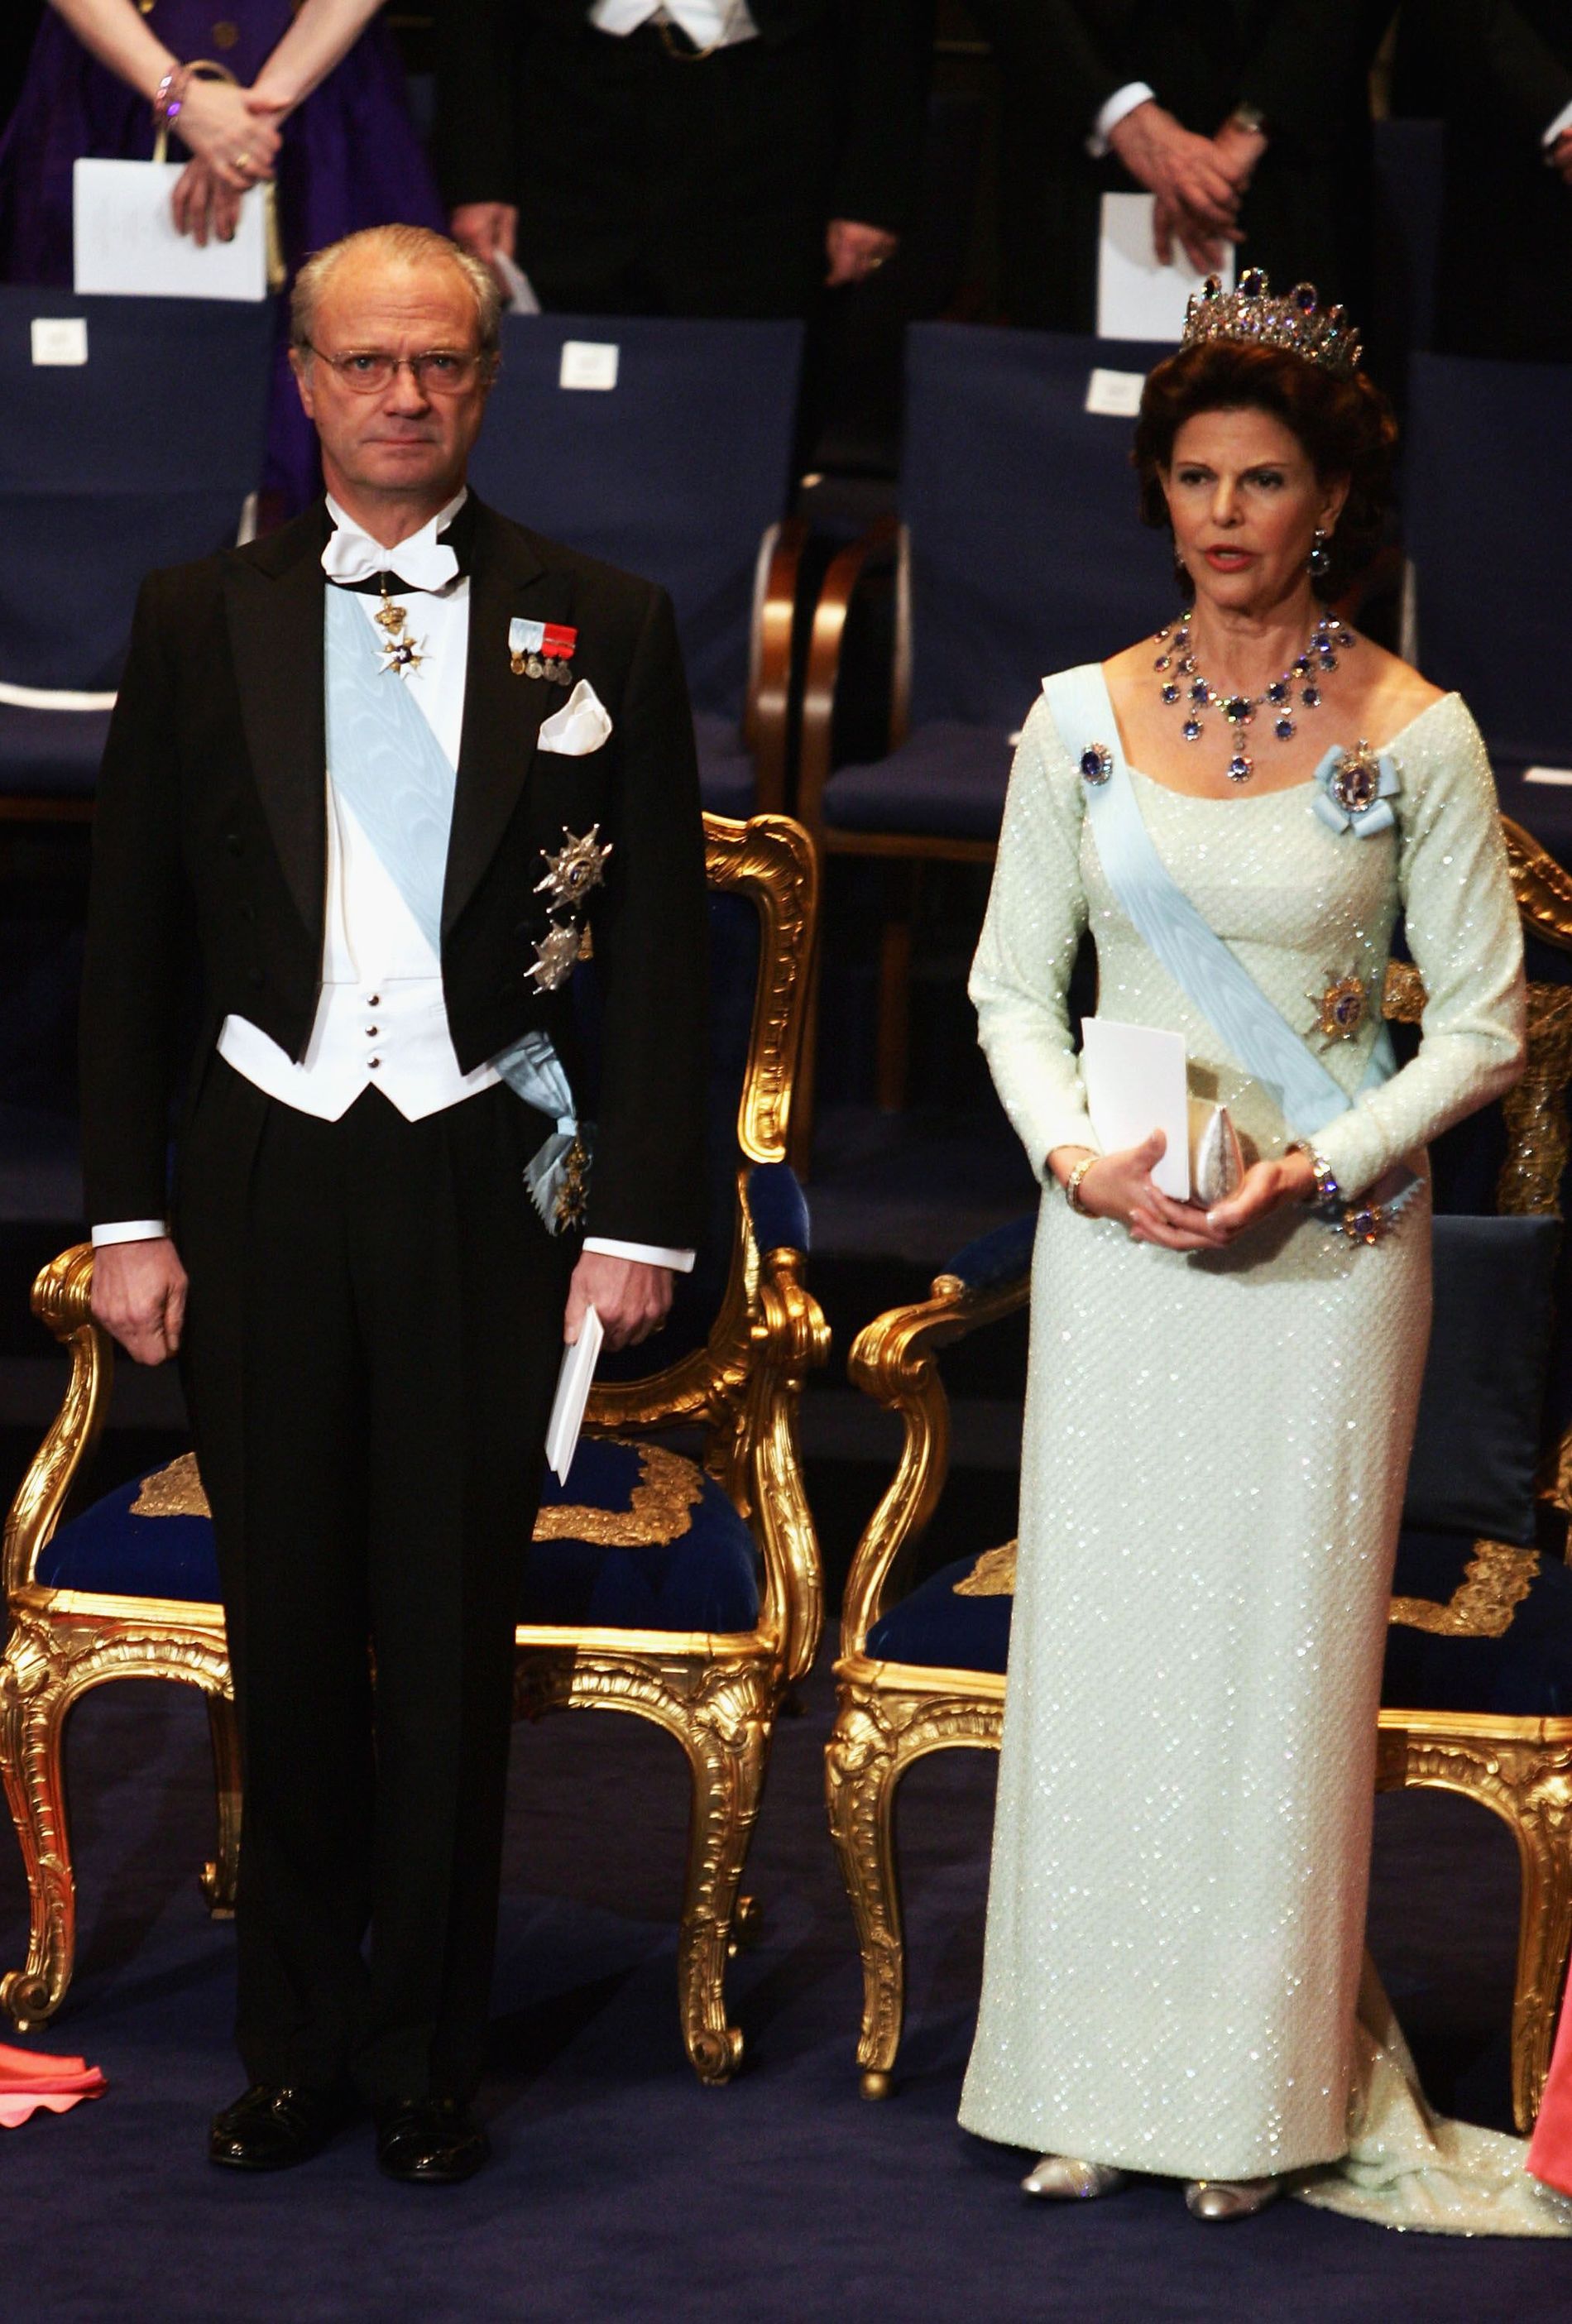 King Carl Gustaf and Queen Silvia of Sweden Nobel Peace Prize